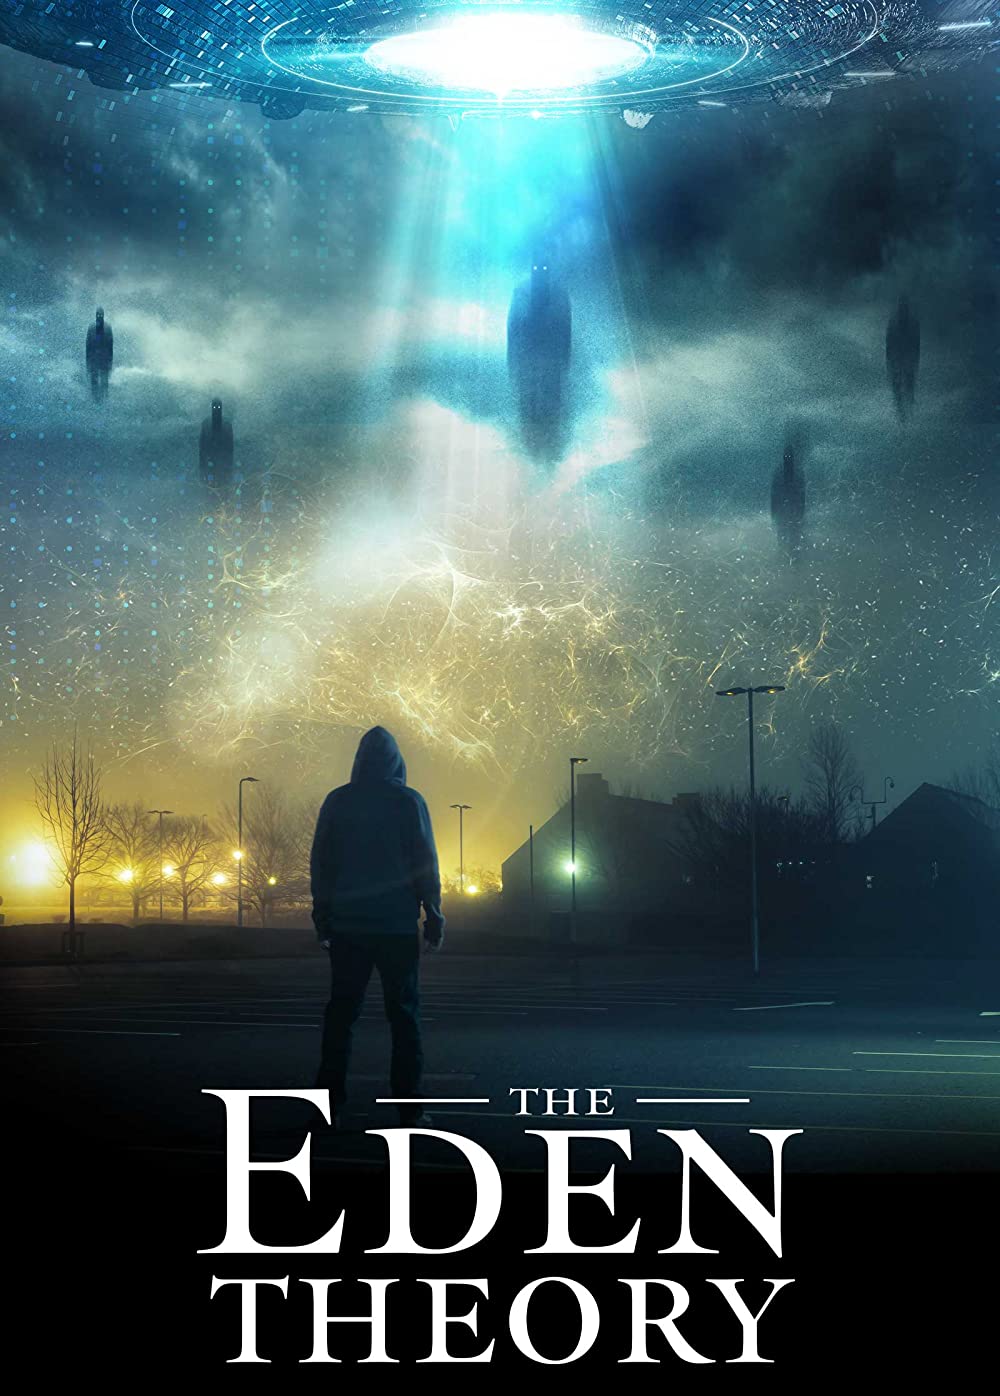 Download The Eden Theory 2022 English Movie 1080p HDRip 1.4GB